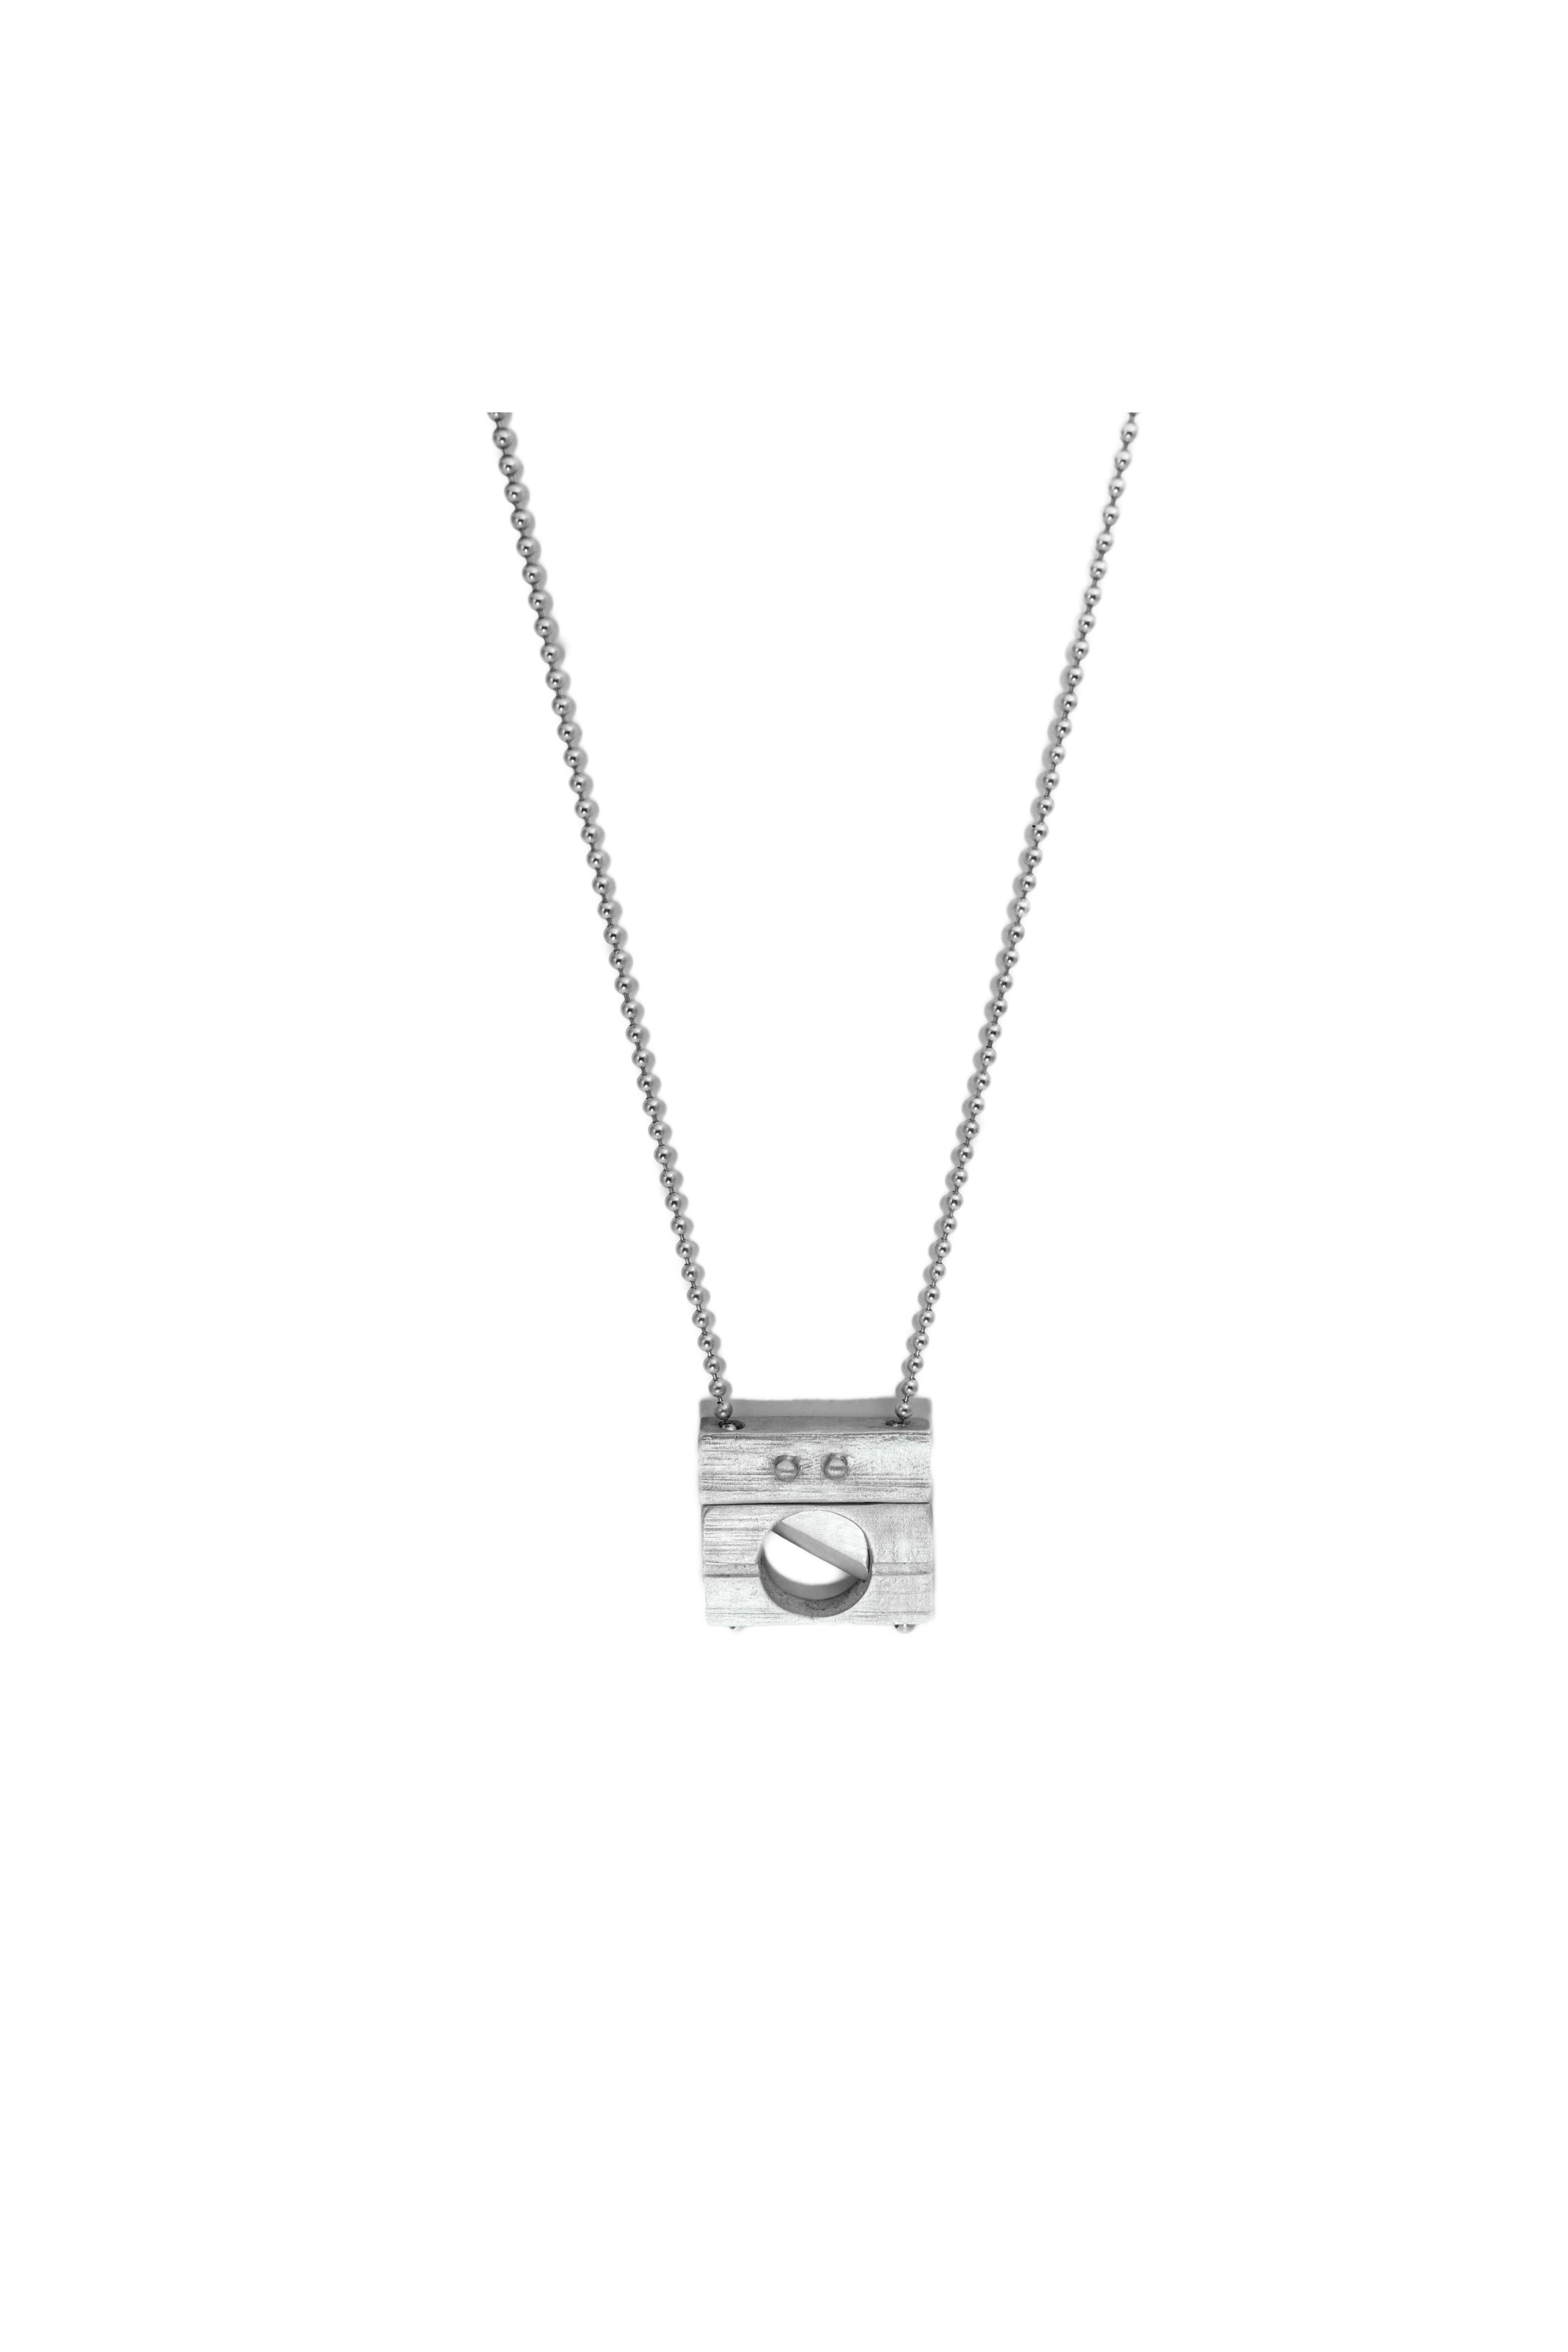 Sterling silver kinetic Guillotine Necklace

Designed and created by Shanel Odum in New York-

